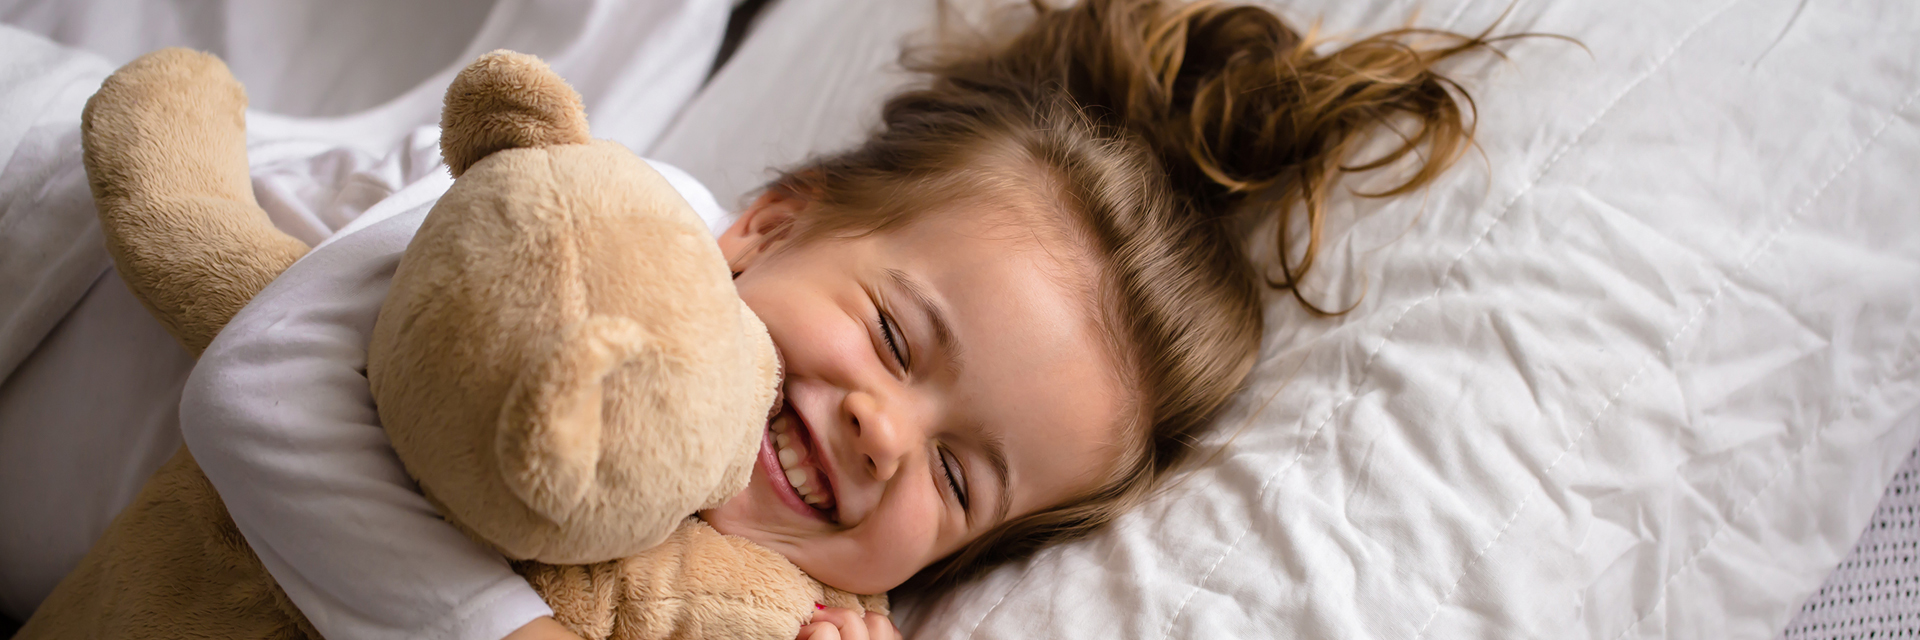 Little girl in bed holding plush toy